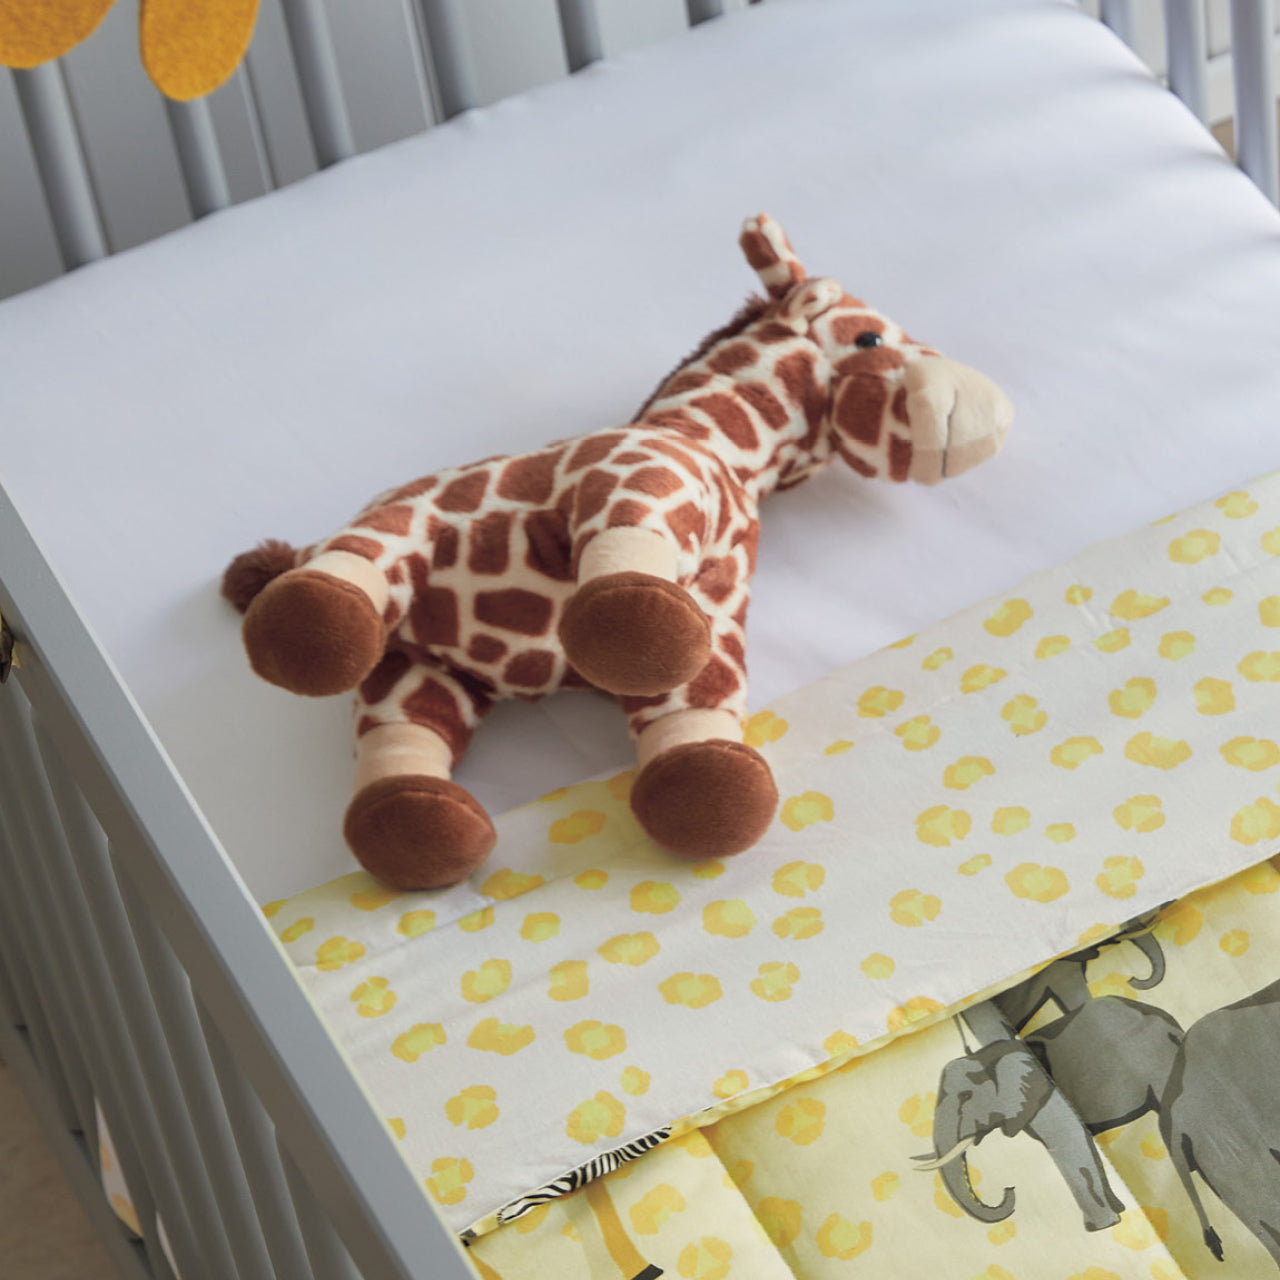 Giraffe Soft Toy laying down in cot